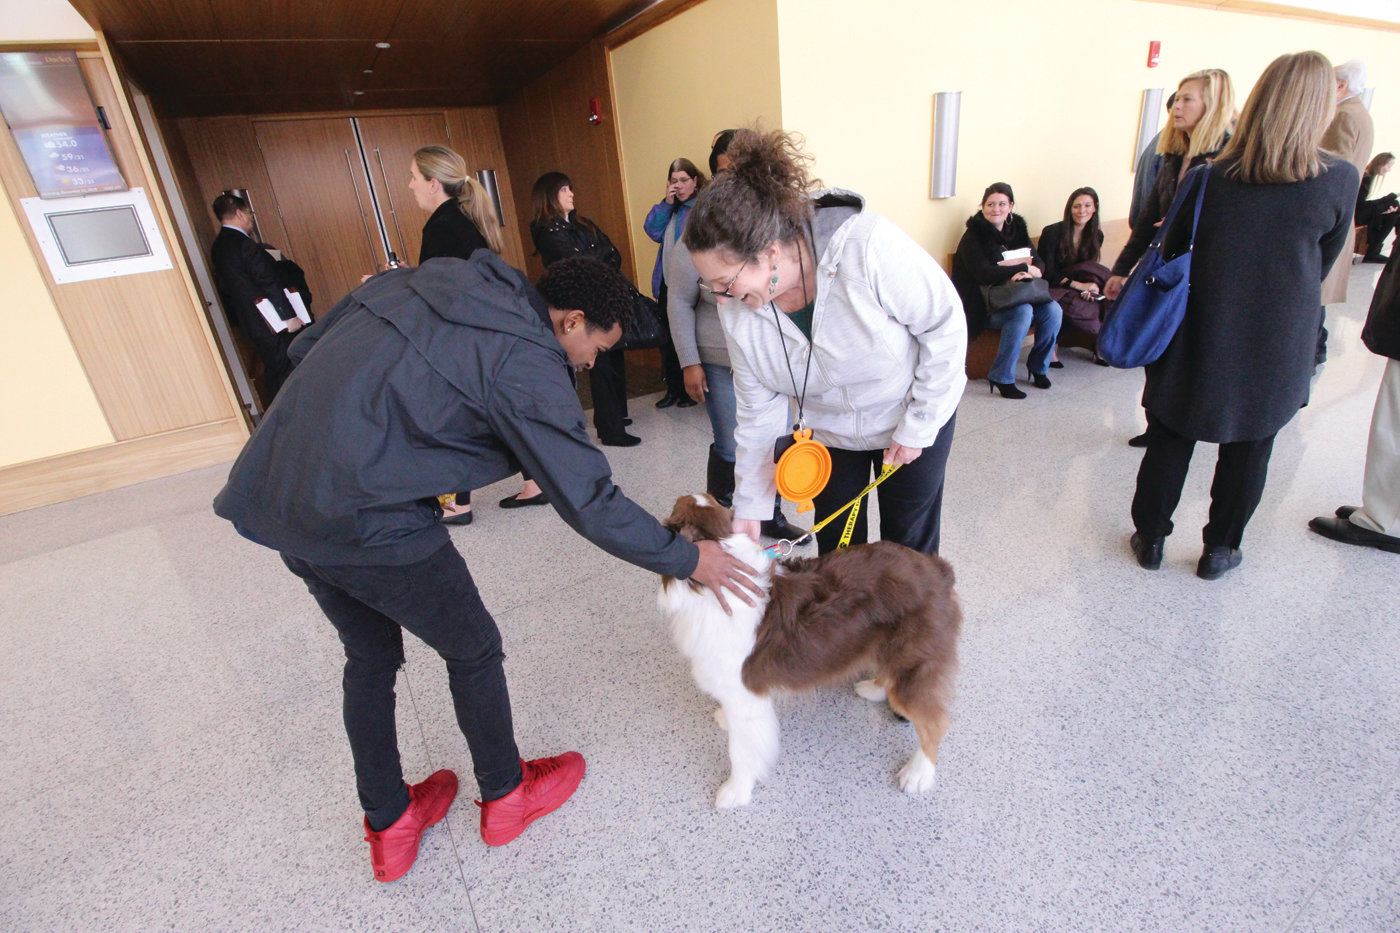 CENTER OF ATTRACTION: Curry and his master, Judy Van-Wyk, were an instant hit at Kent County Family Court on Thursday.